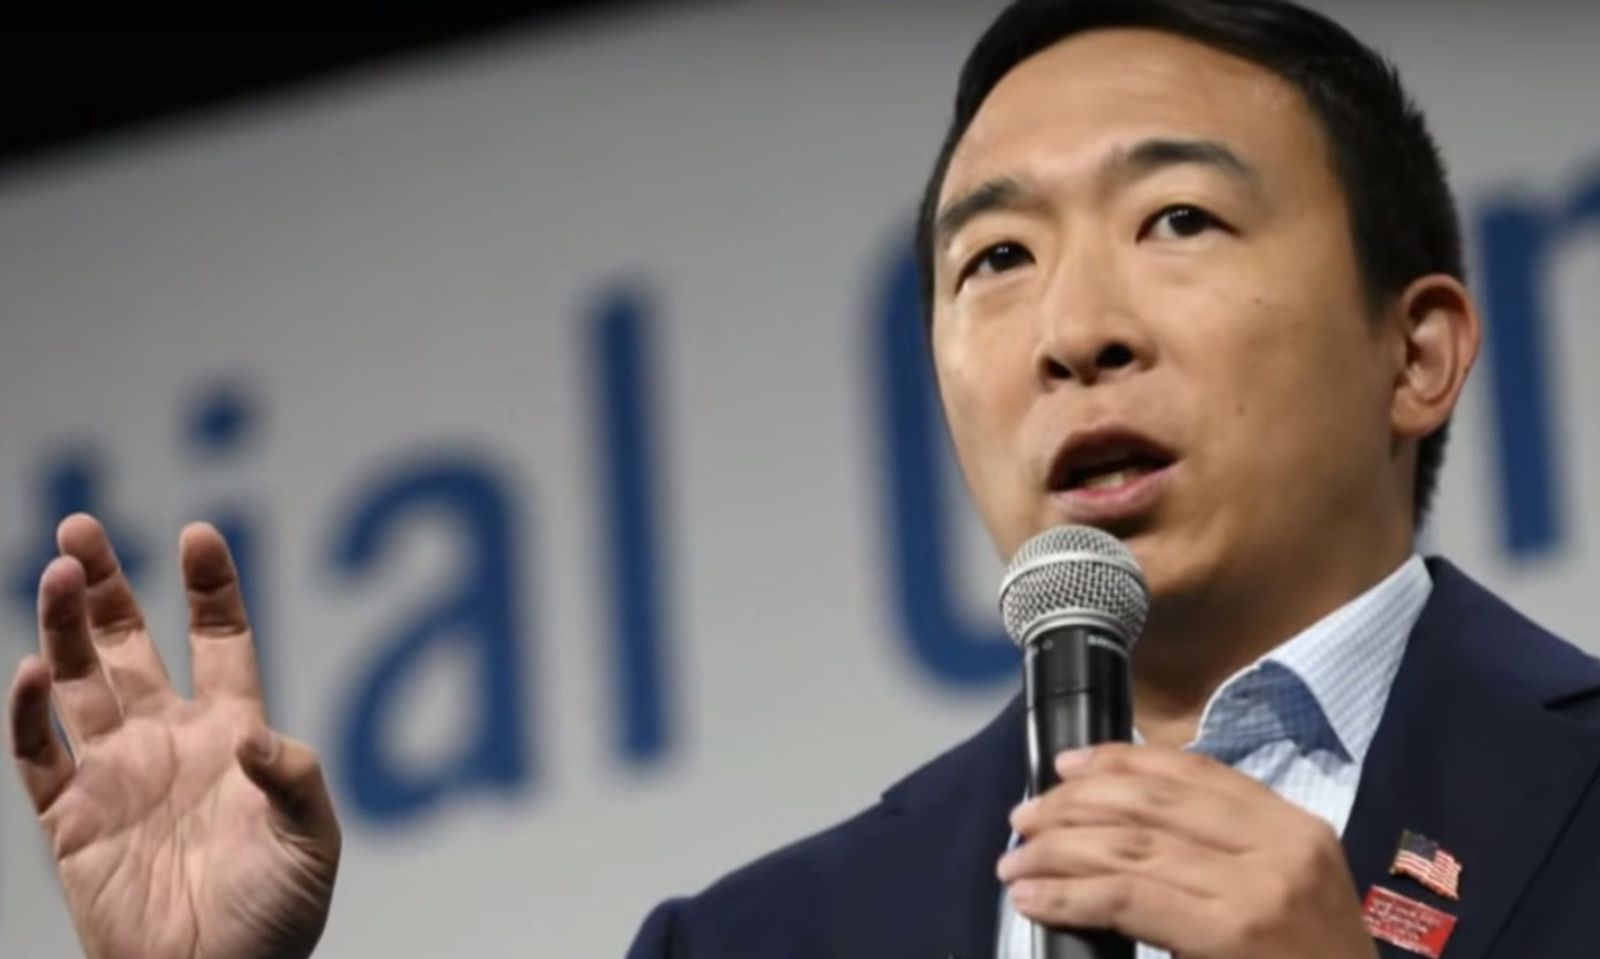 Andrew Yang Declares ‘Rampant’ Access to Porn ‘A Real Problem’